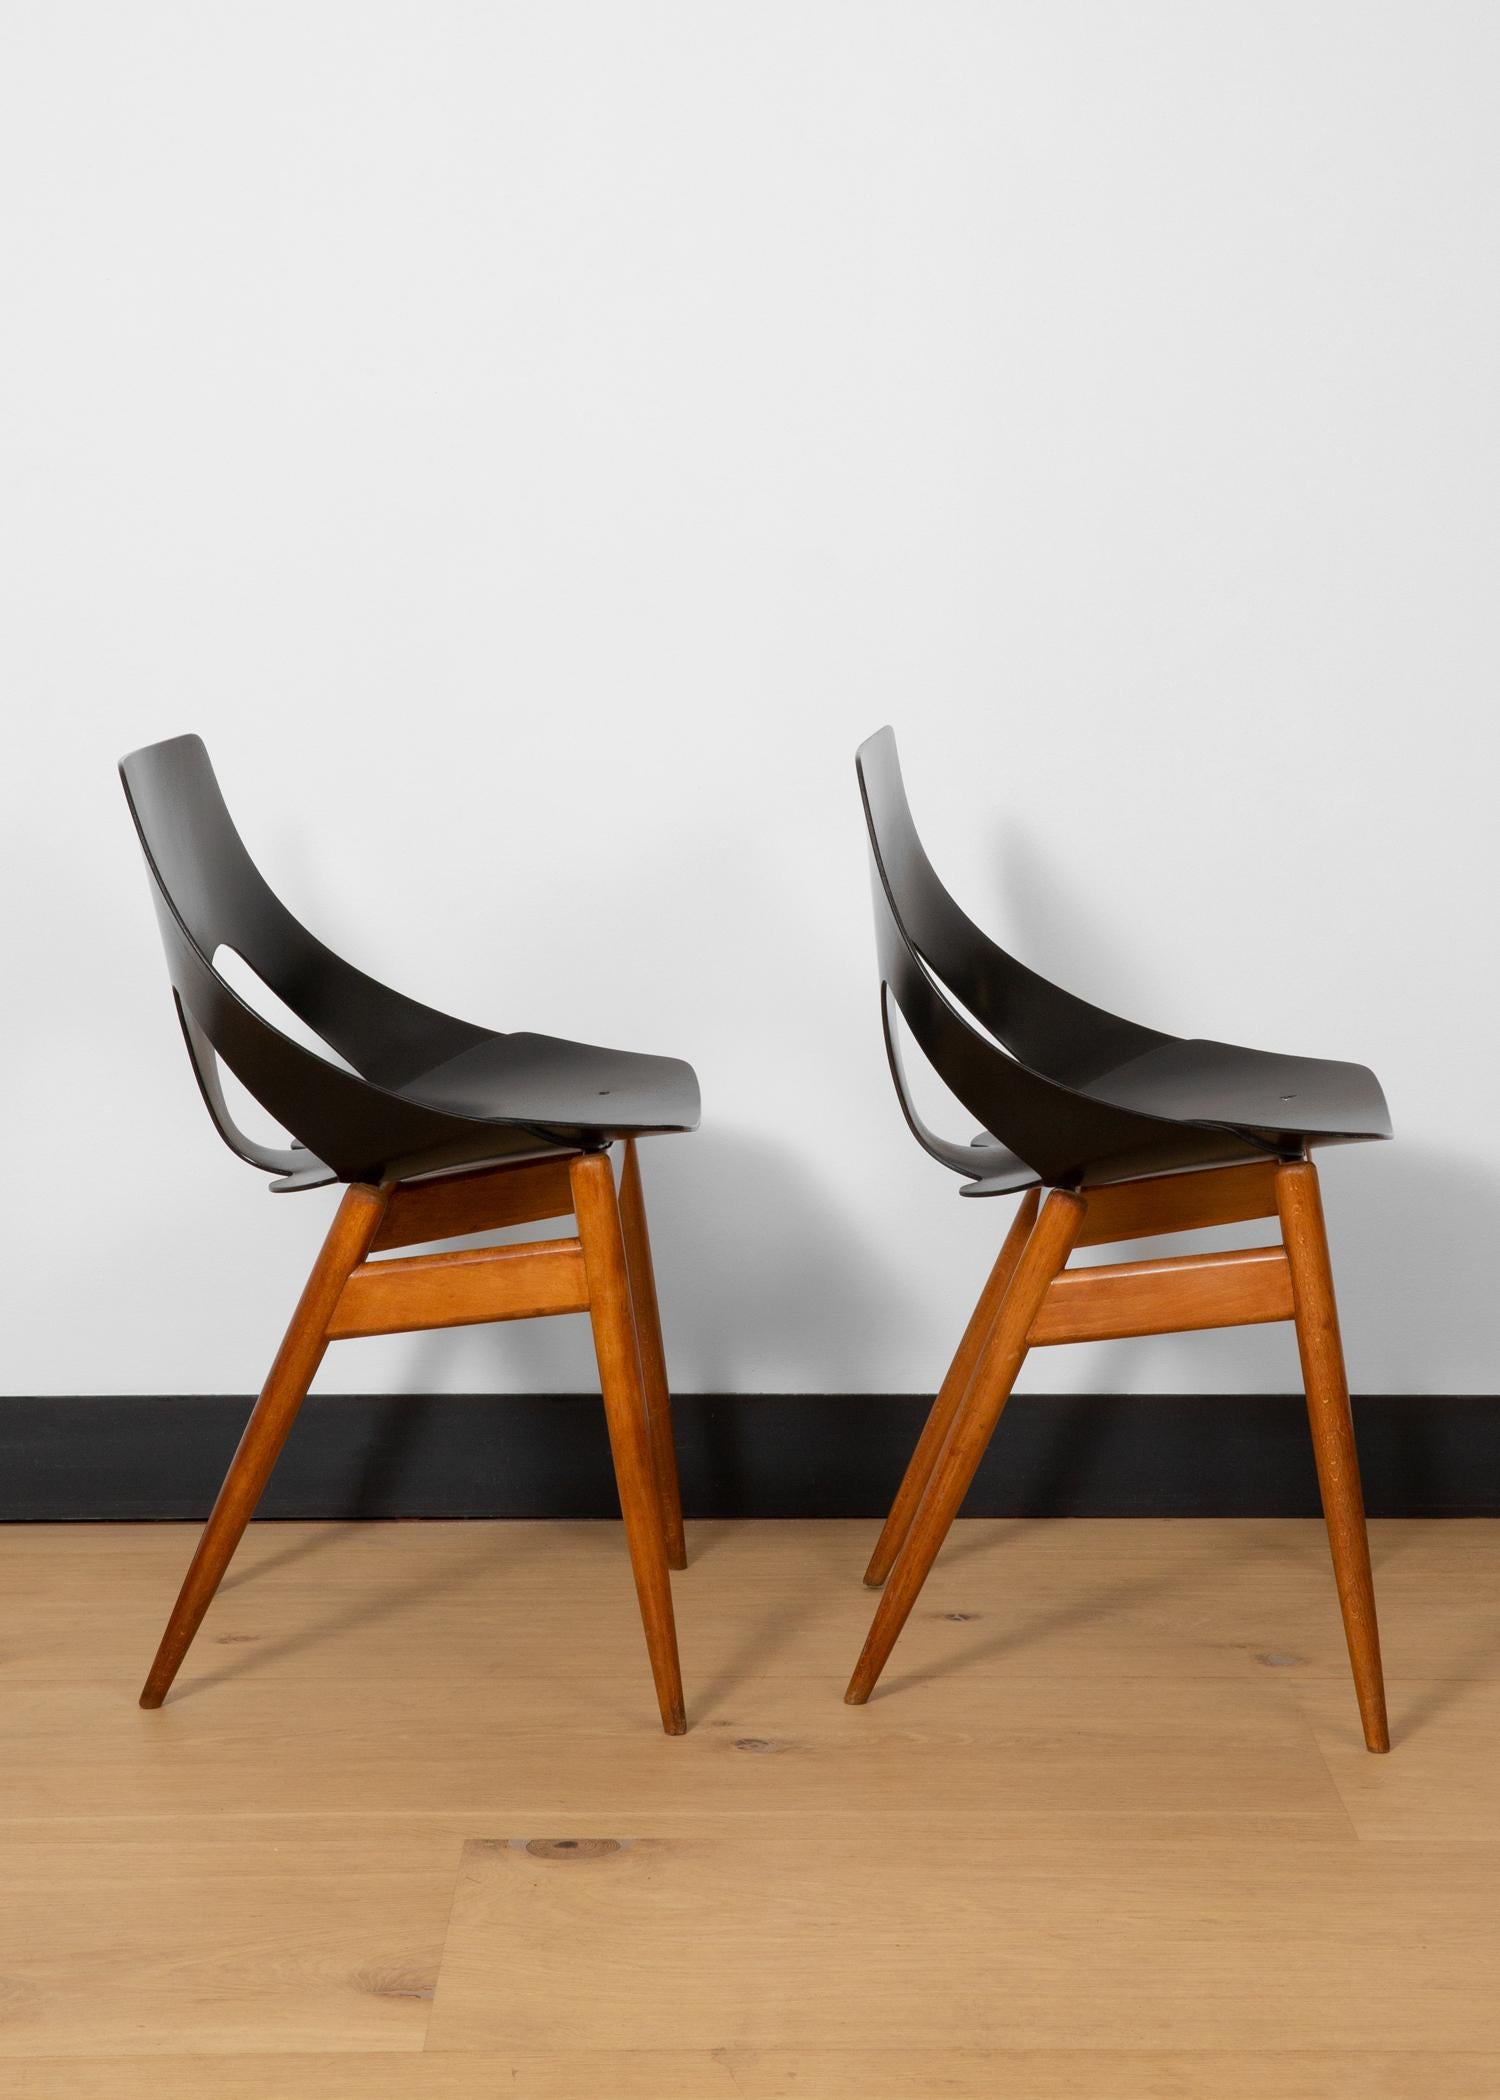 Mid-Century Modern Pair of 'C2' Chairs By Carl Jacobs for Kandya 1950s For Sale